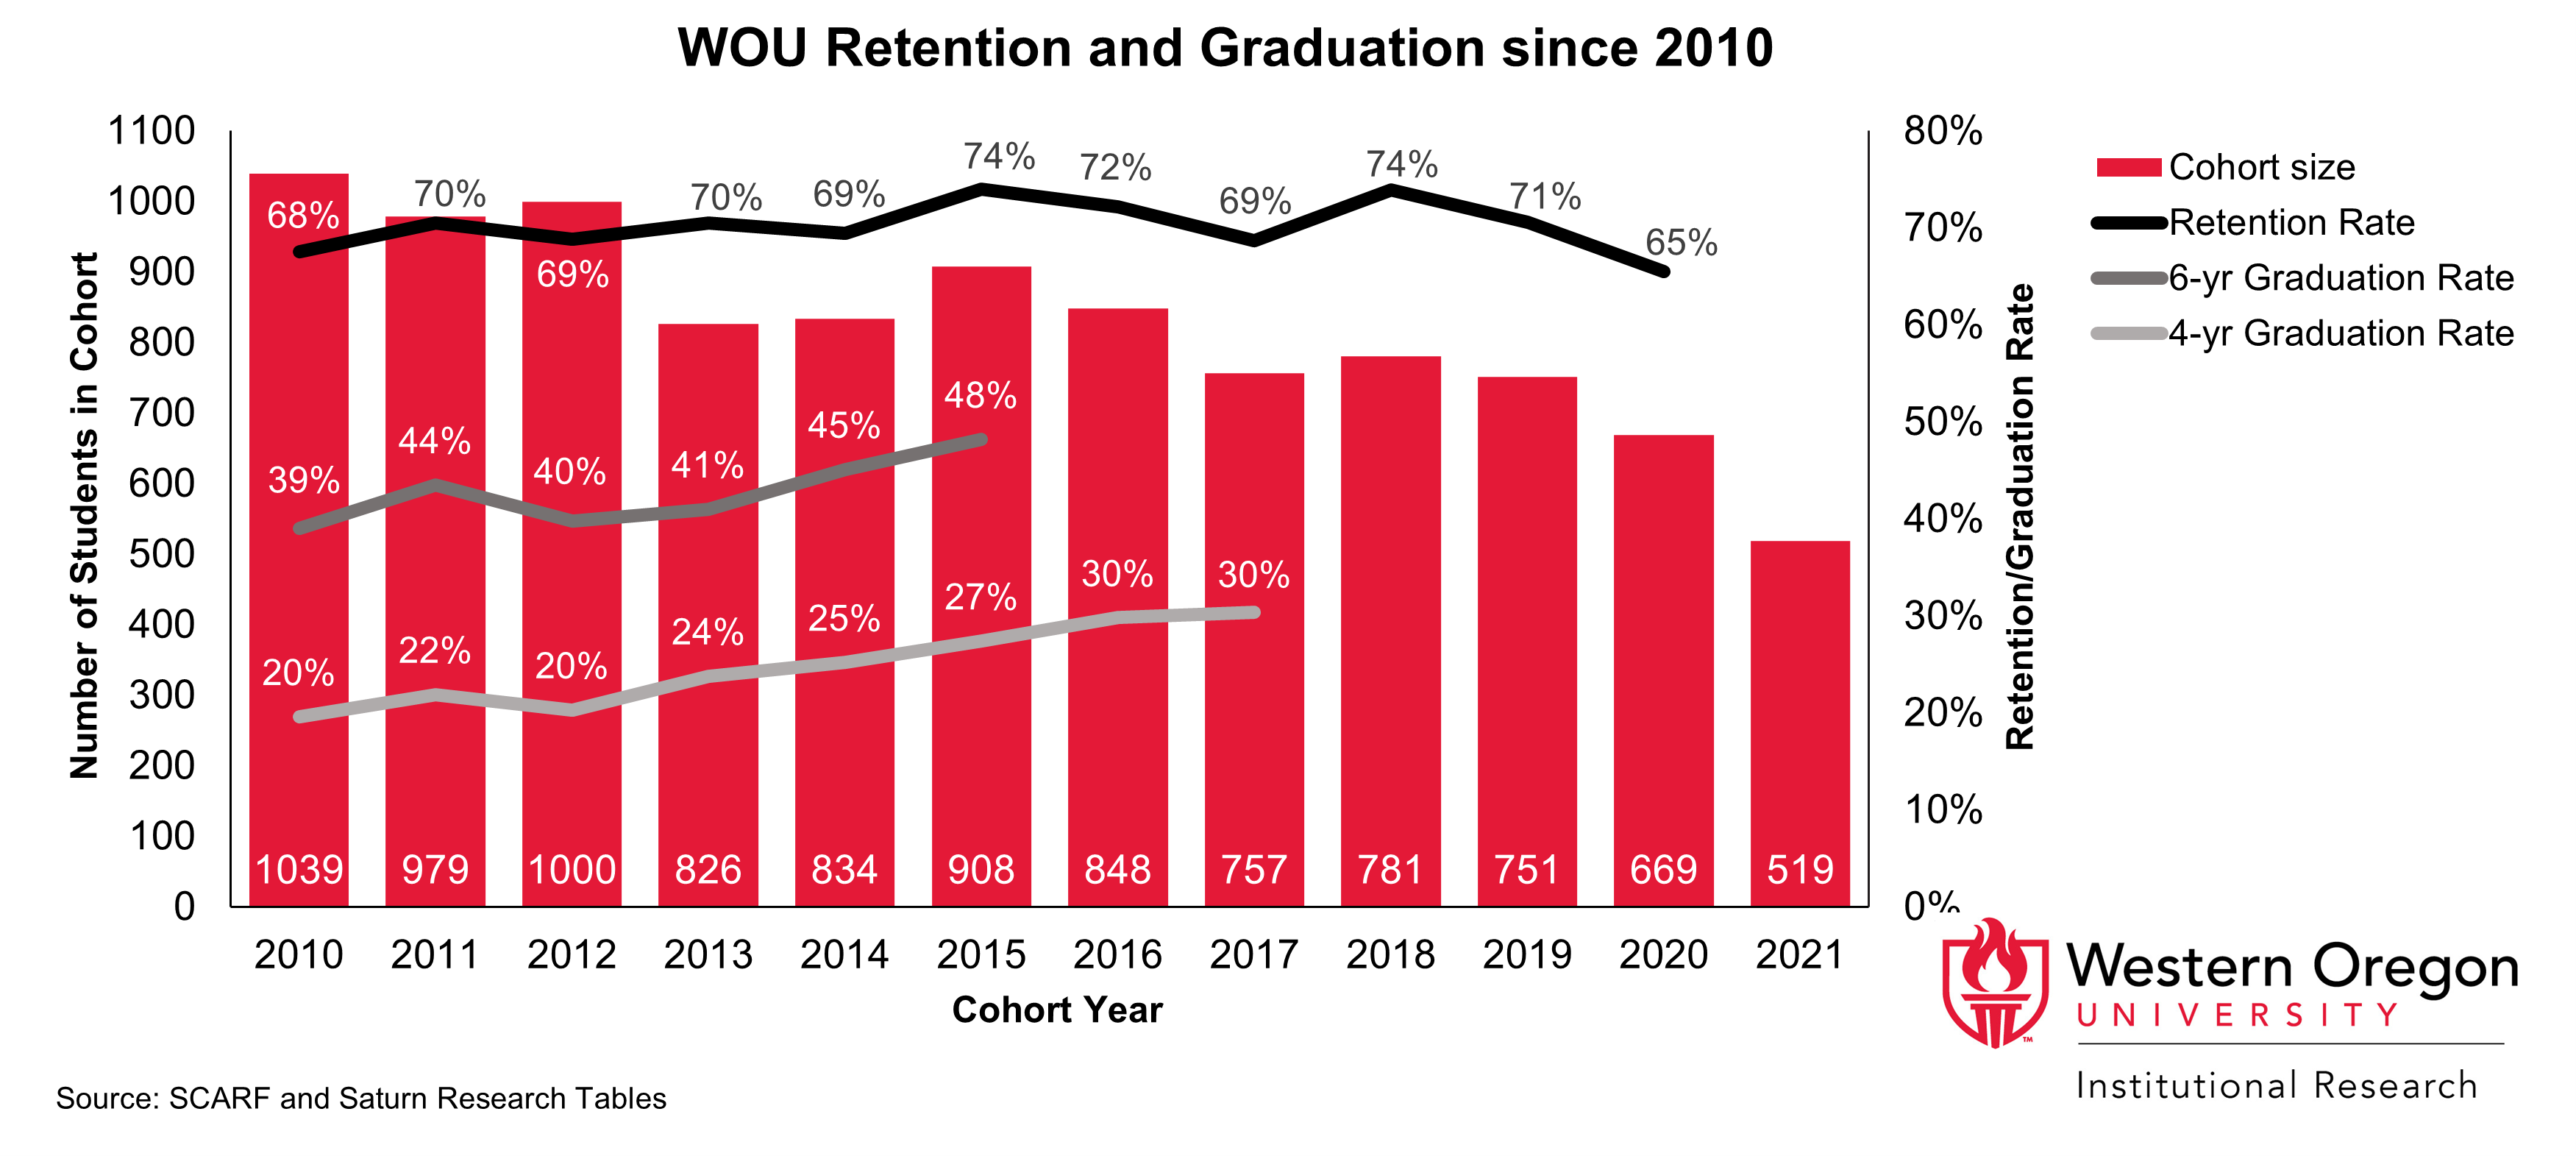 Bar and line graph of retention and 4- and 6-year graduation rates since 2010 for WOU students, showing that graduation rates have been steadily increasing while retention rates have remained largely stable